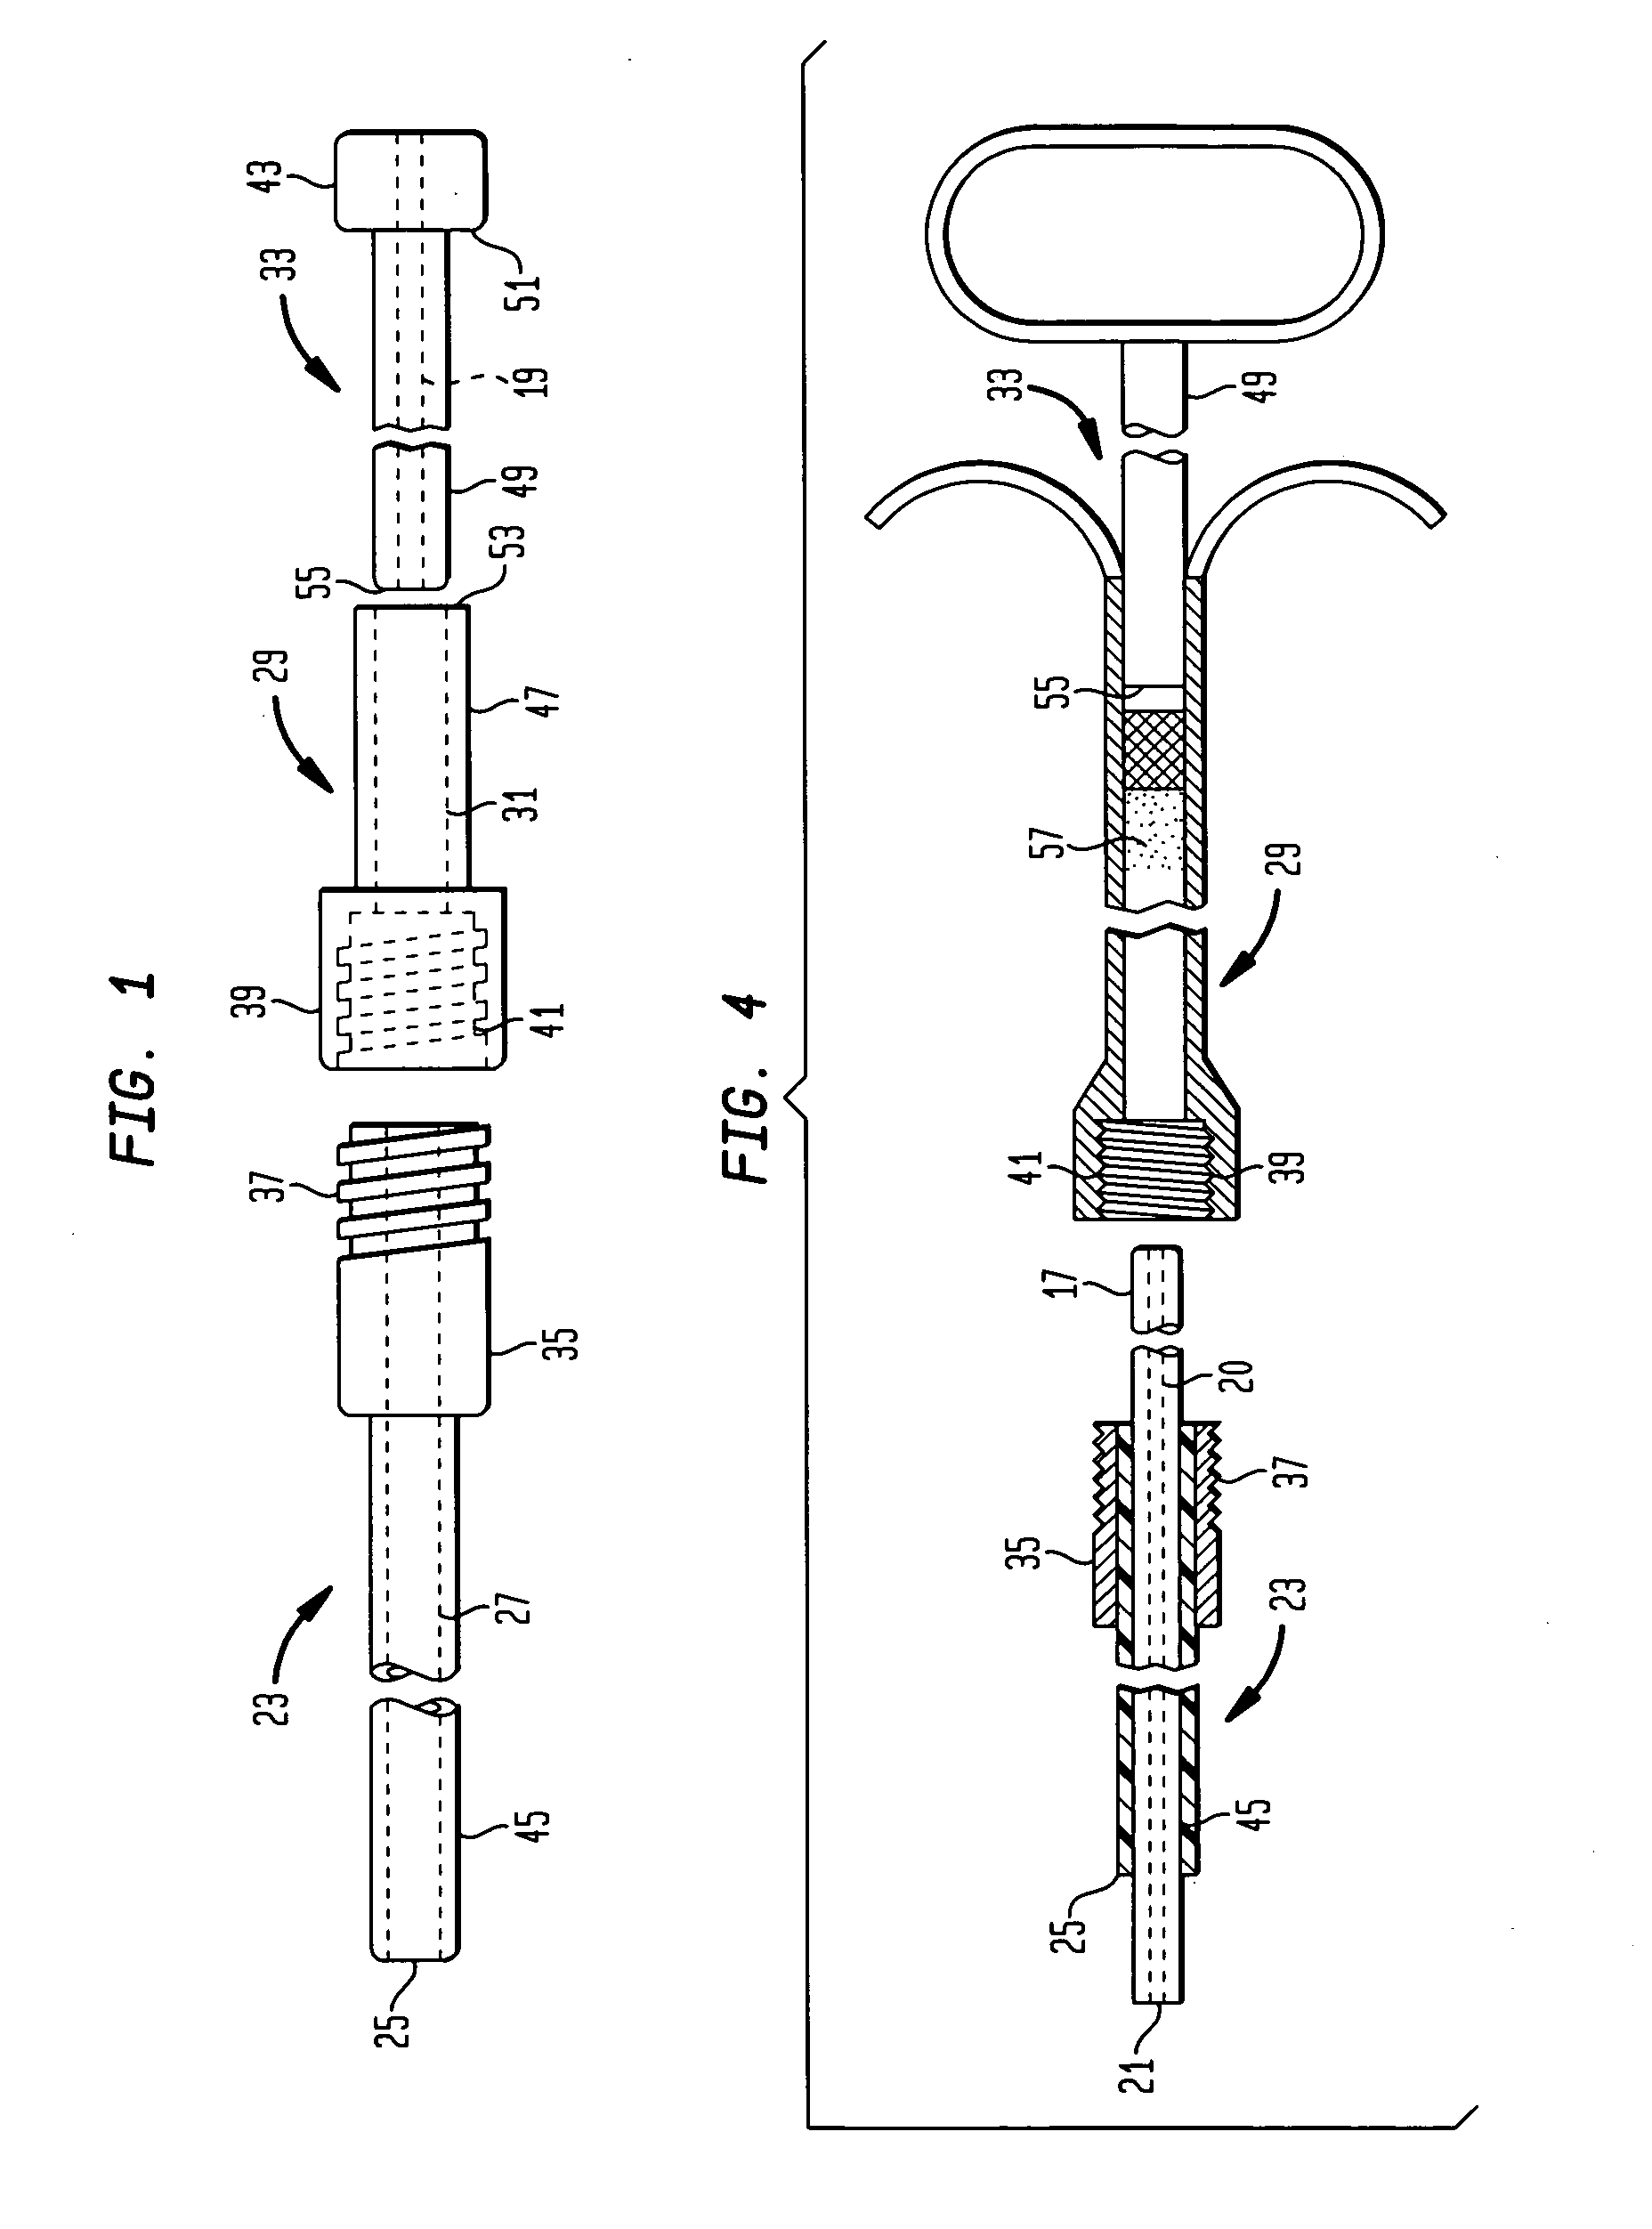 Device and method for sealing puncture wounds